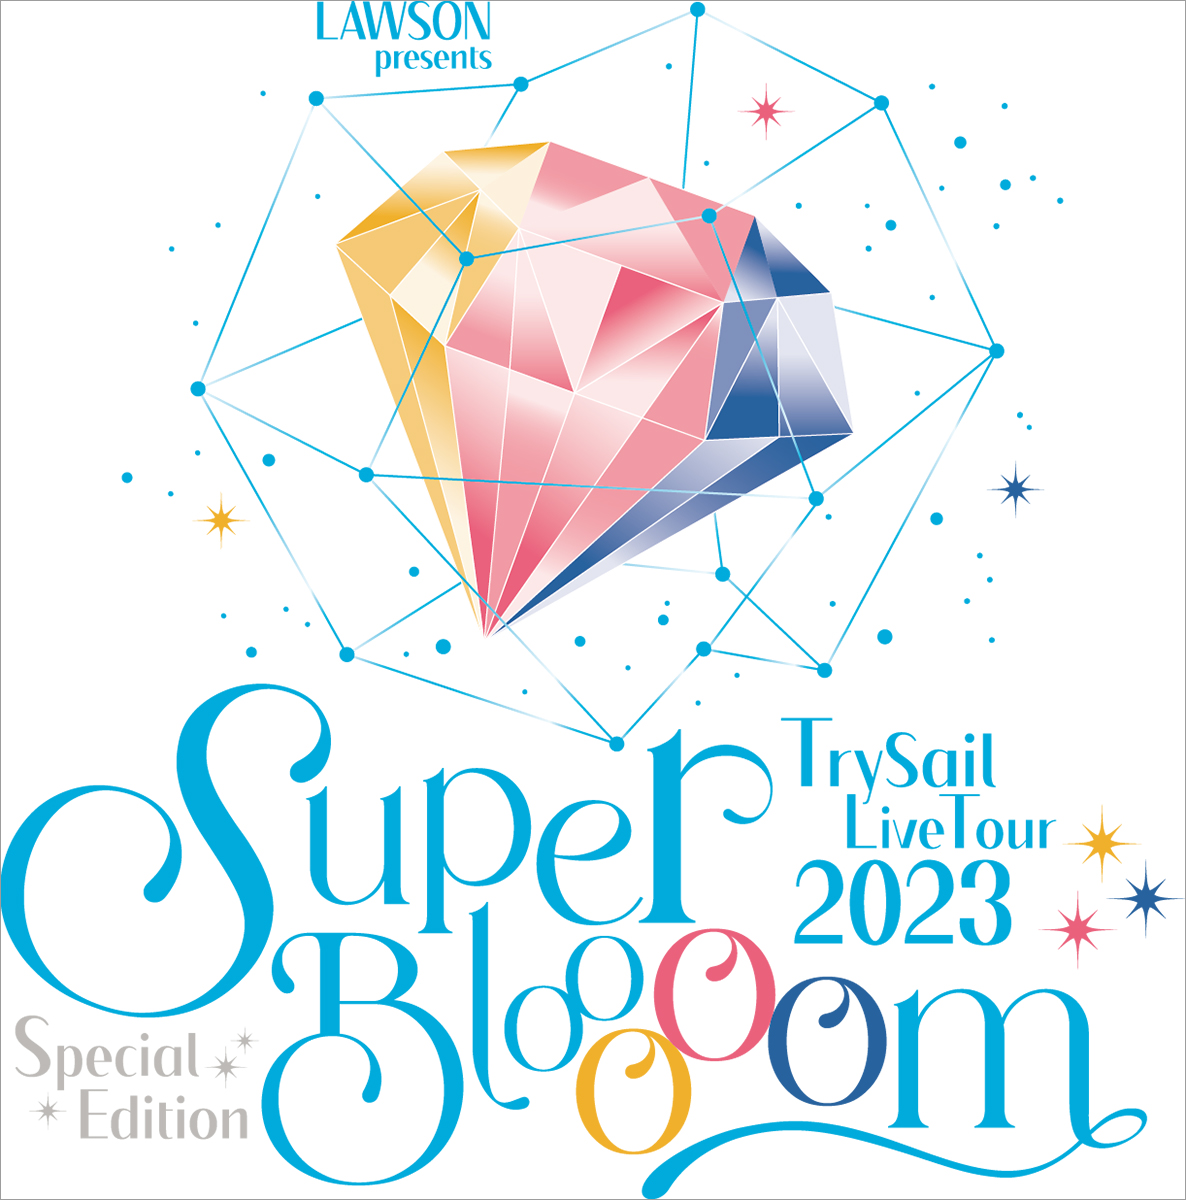 TrySail、全国ツアー追加公演のタイトル＆ロゴ決定！LAWSON presents TrySail Live Tour 2023 Special Edition “SuperBlooooom”は9月30日（土）・10月1日（日）開催 - 画像一覧（1/2）